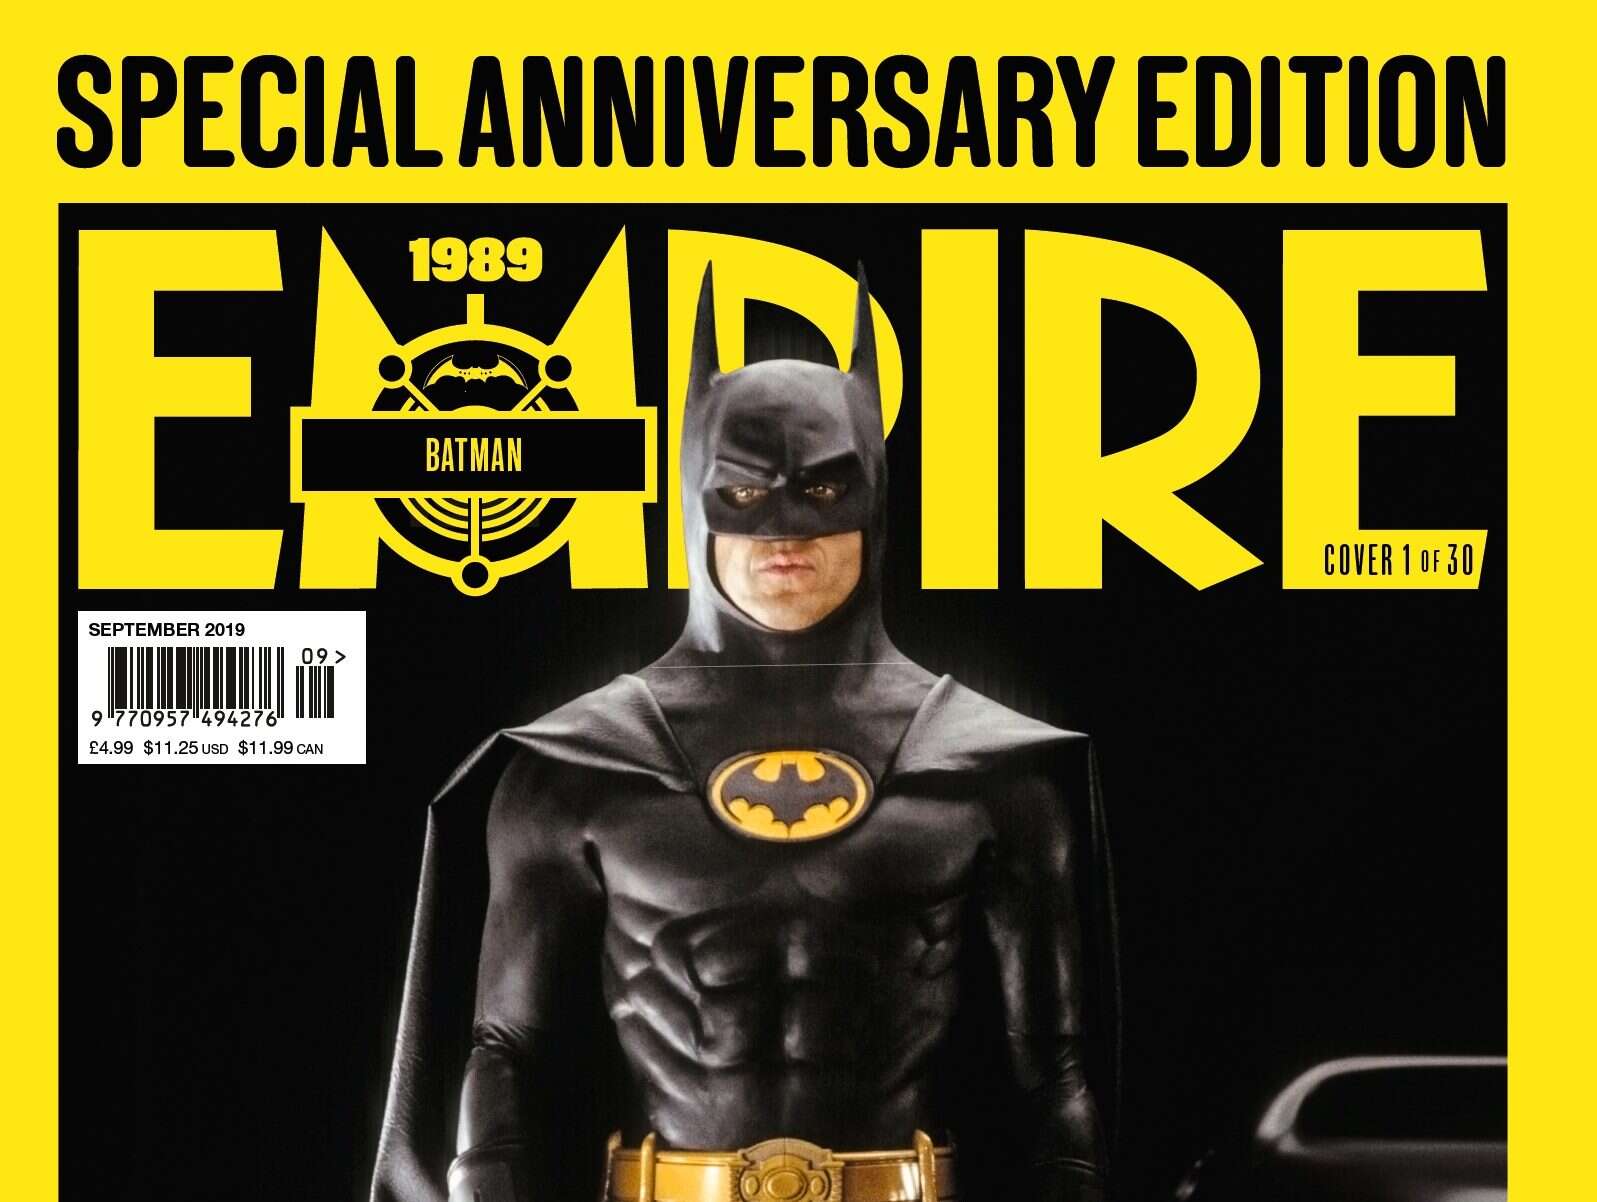 GALLERY: Empire marks 30 years in print with 30 iconic film covers